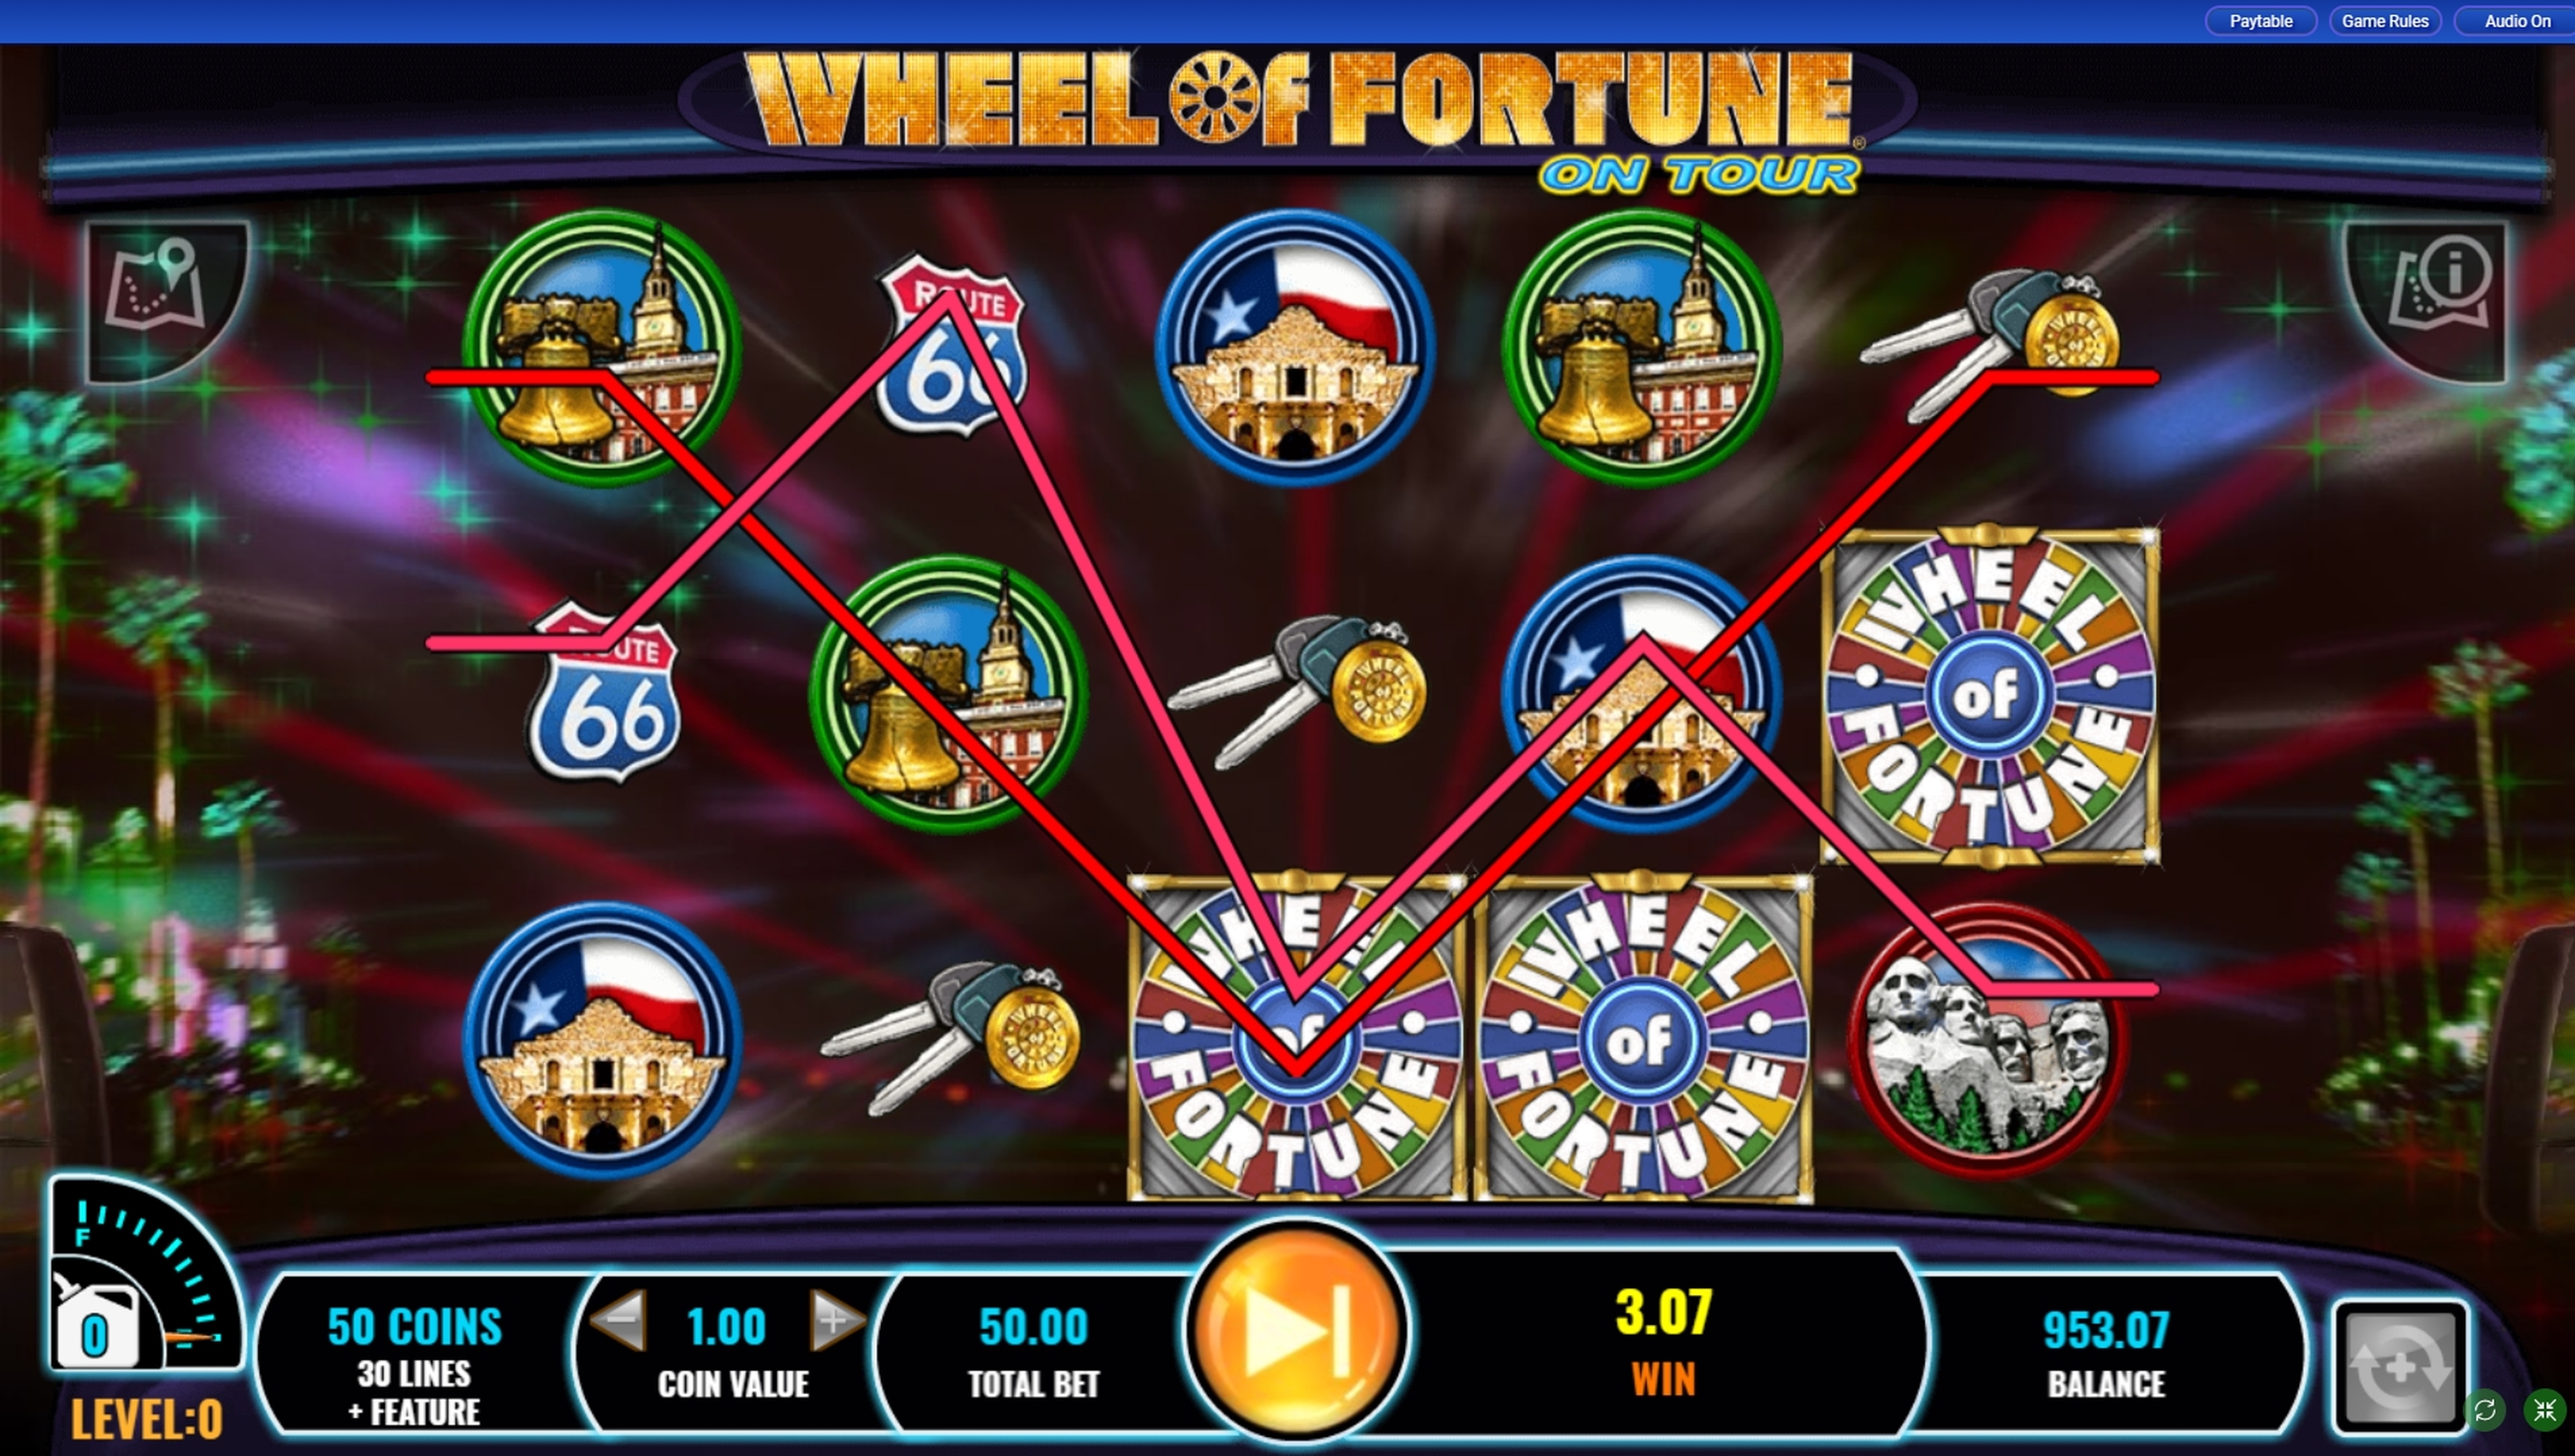 Win Money in Wheel of Fortune on tour Free Slot Game by IGT